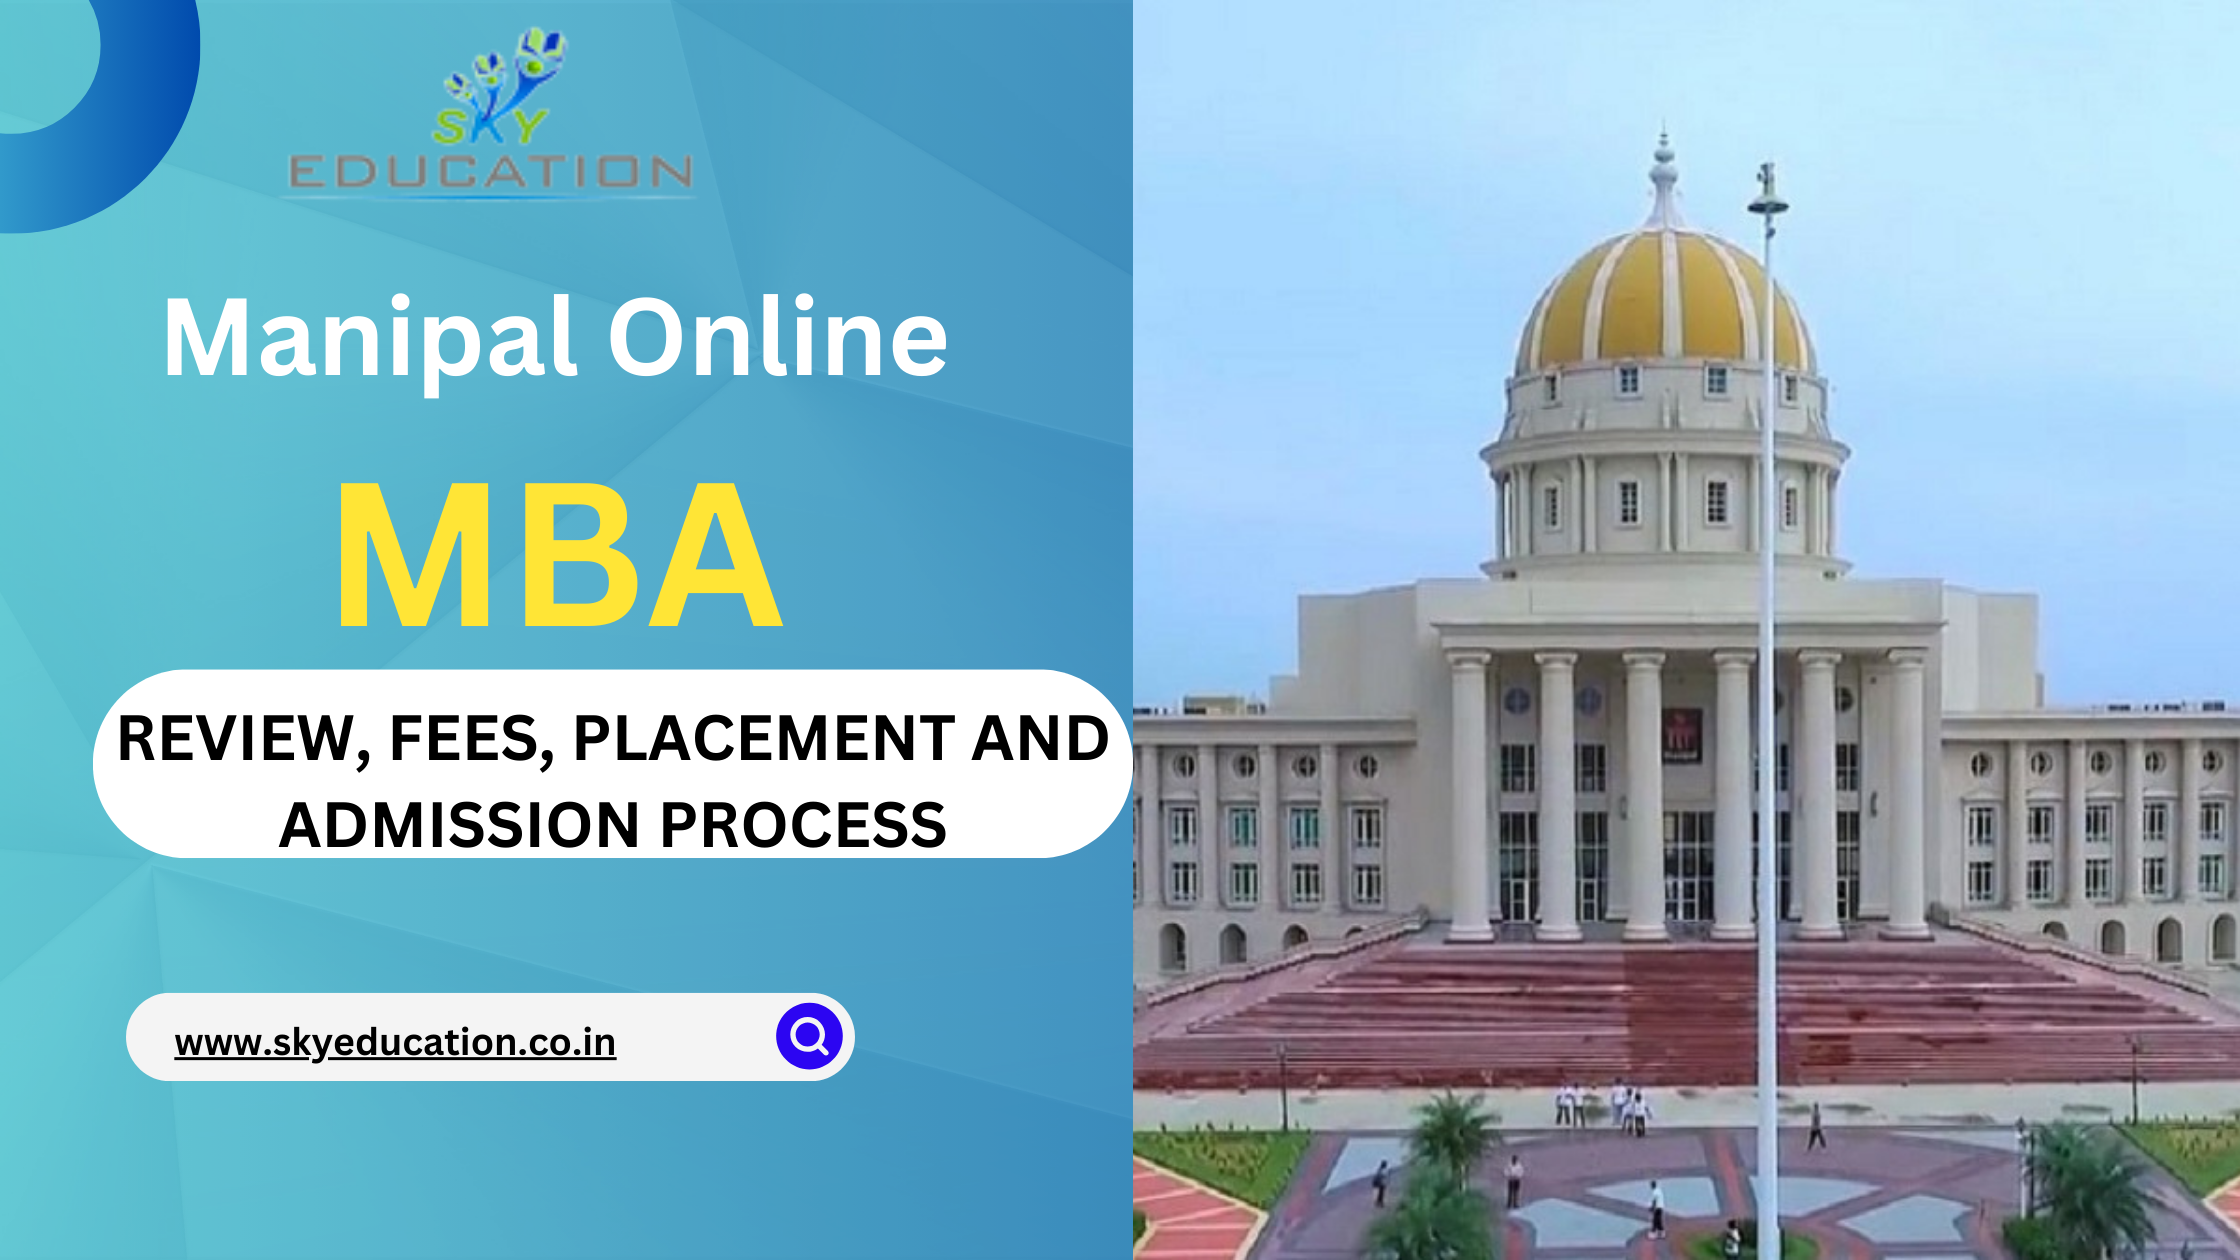 Manipal University, Jaipur : Manipal Online MBA Review 'photo